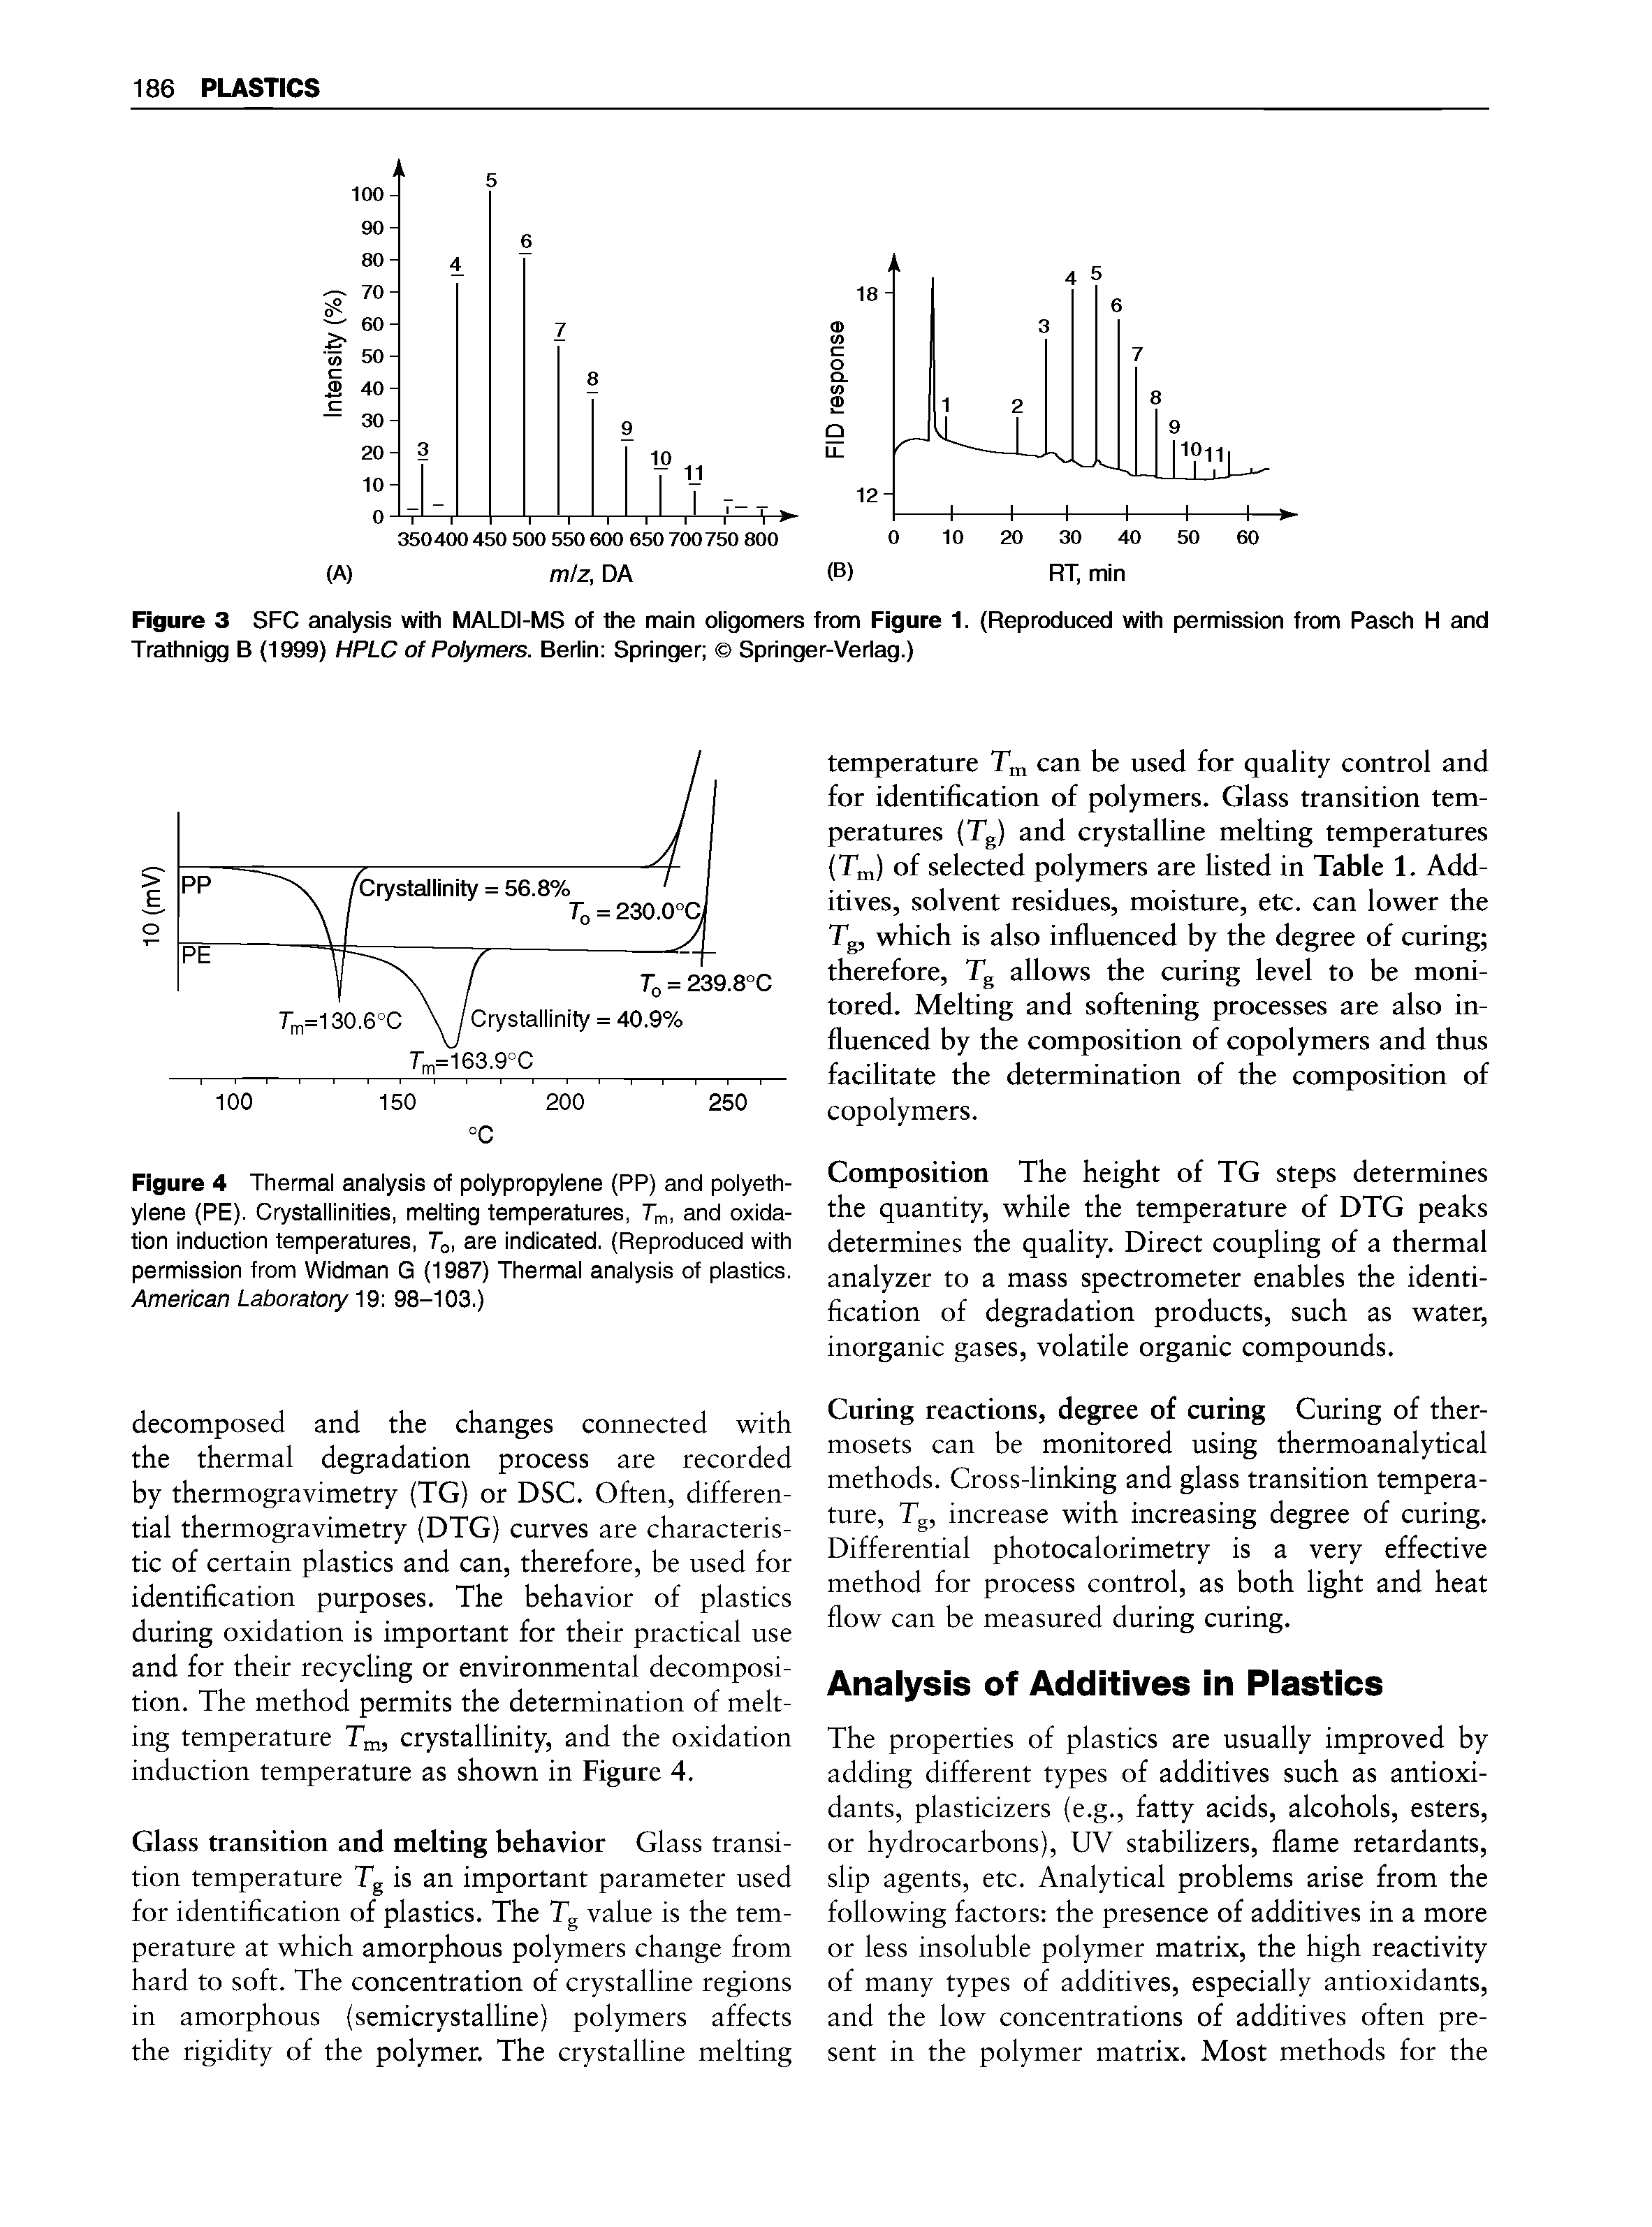 Figure 4 Thermal analysis of polypropylene (PP) and polyethylene (PE). Crystallinities, melting temperatures, T, and oxidation induction temperatures, To, are indicated. (Reproduced with permission from Widman G (1987) Thermal analysis of plastics. American Laboratory 19 98-103.)...